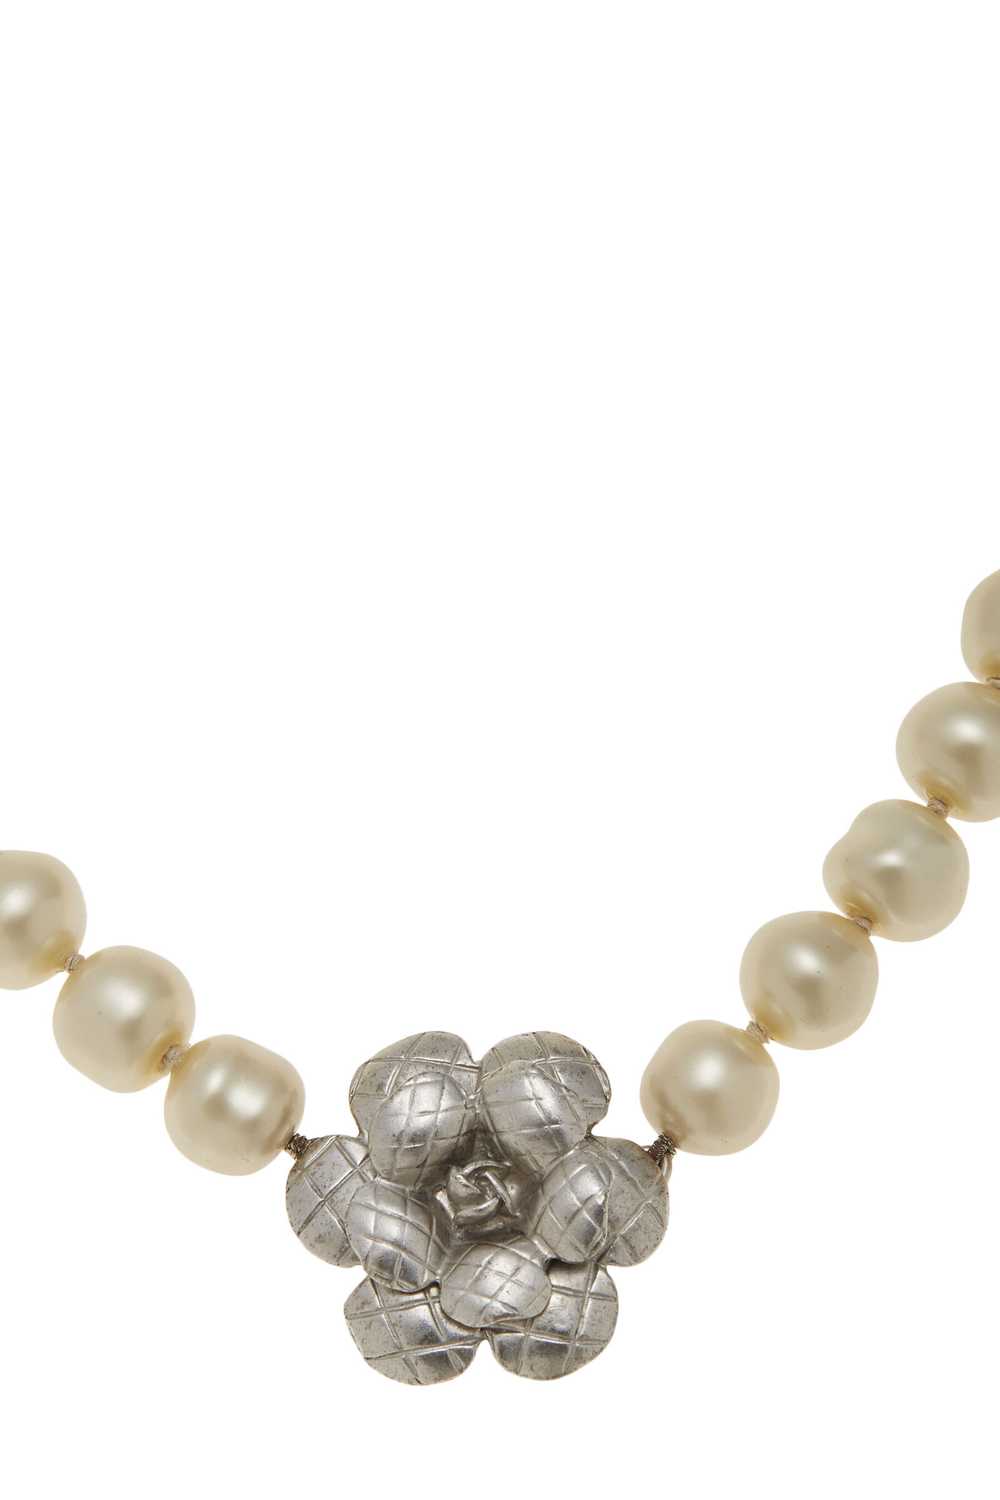 Silver & Faux Pearl 'CC' Necklace - image 2